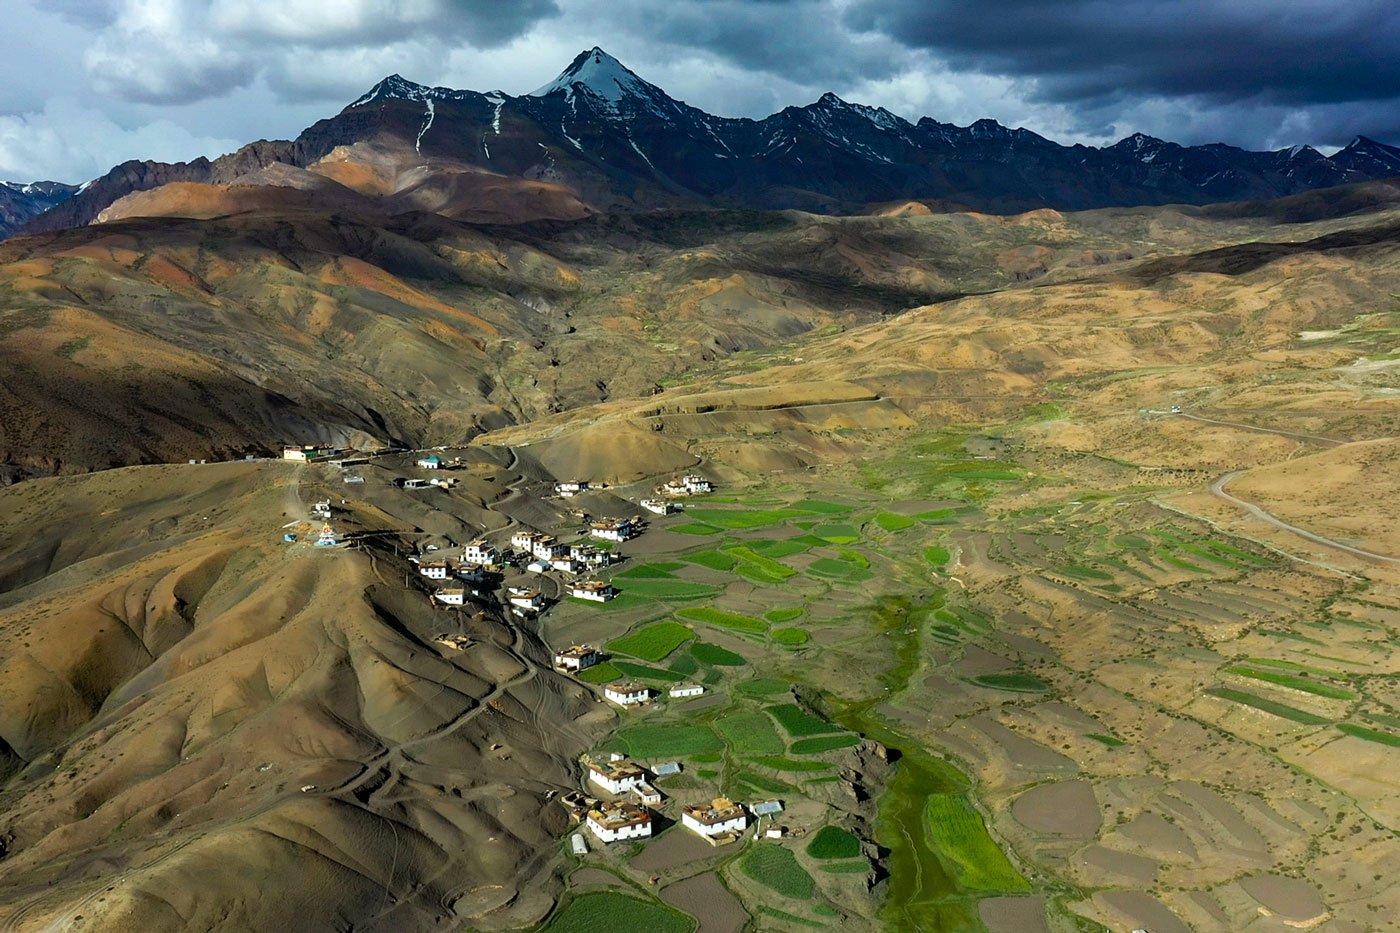 Langza village is situated at an altitude of 14,500 ft above sea level in Lahaul-Spiti district of Himachal Pradesh. There are about 32 households in the village and 91 per cent of the people here belong to the Bhot community, listed as scheduled tribe in the state